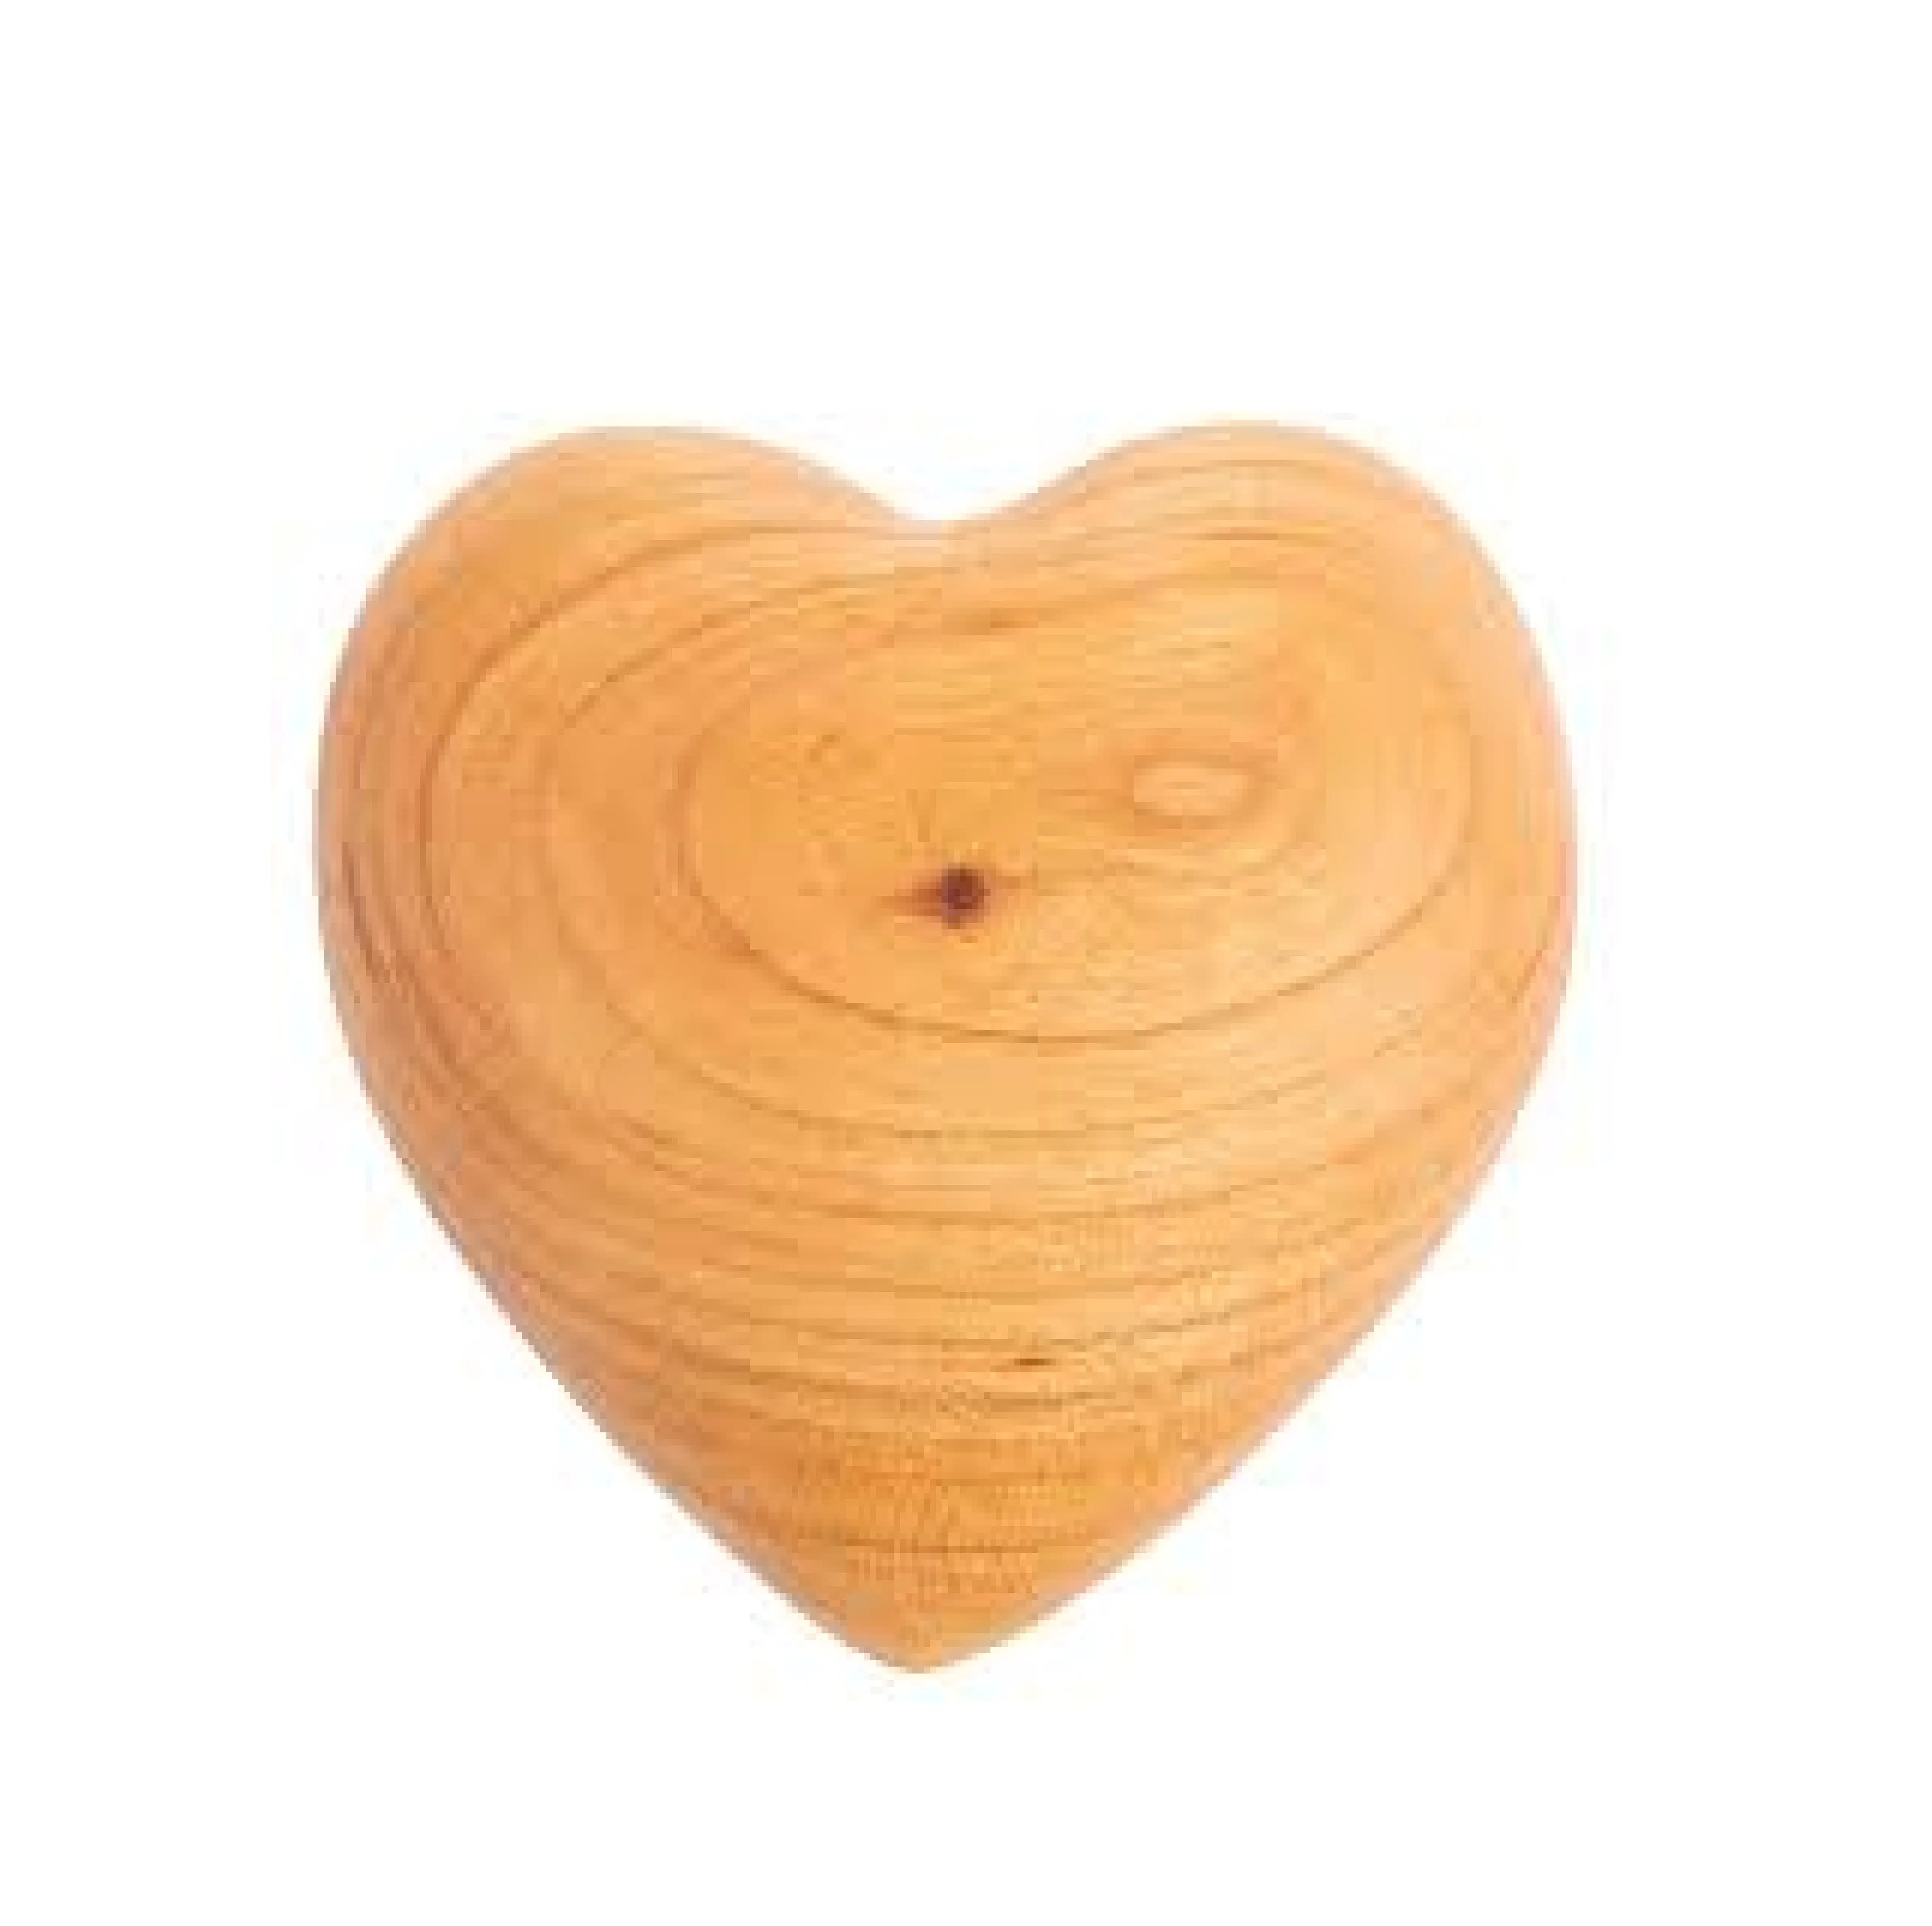 Wholesale Custom Wood Jewelry Box Made India Manufacturer Of Wooden Heart Design Jewelry Box